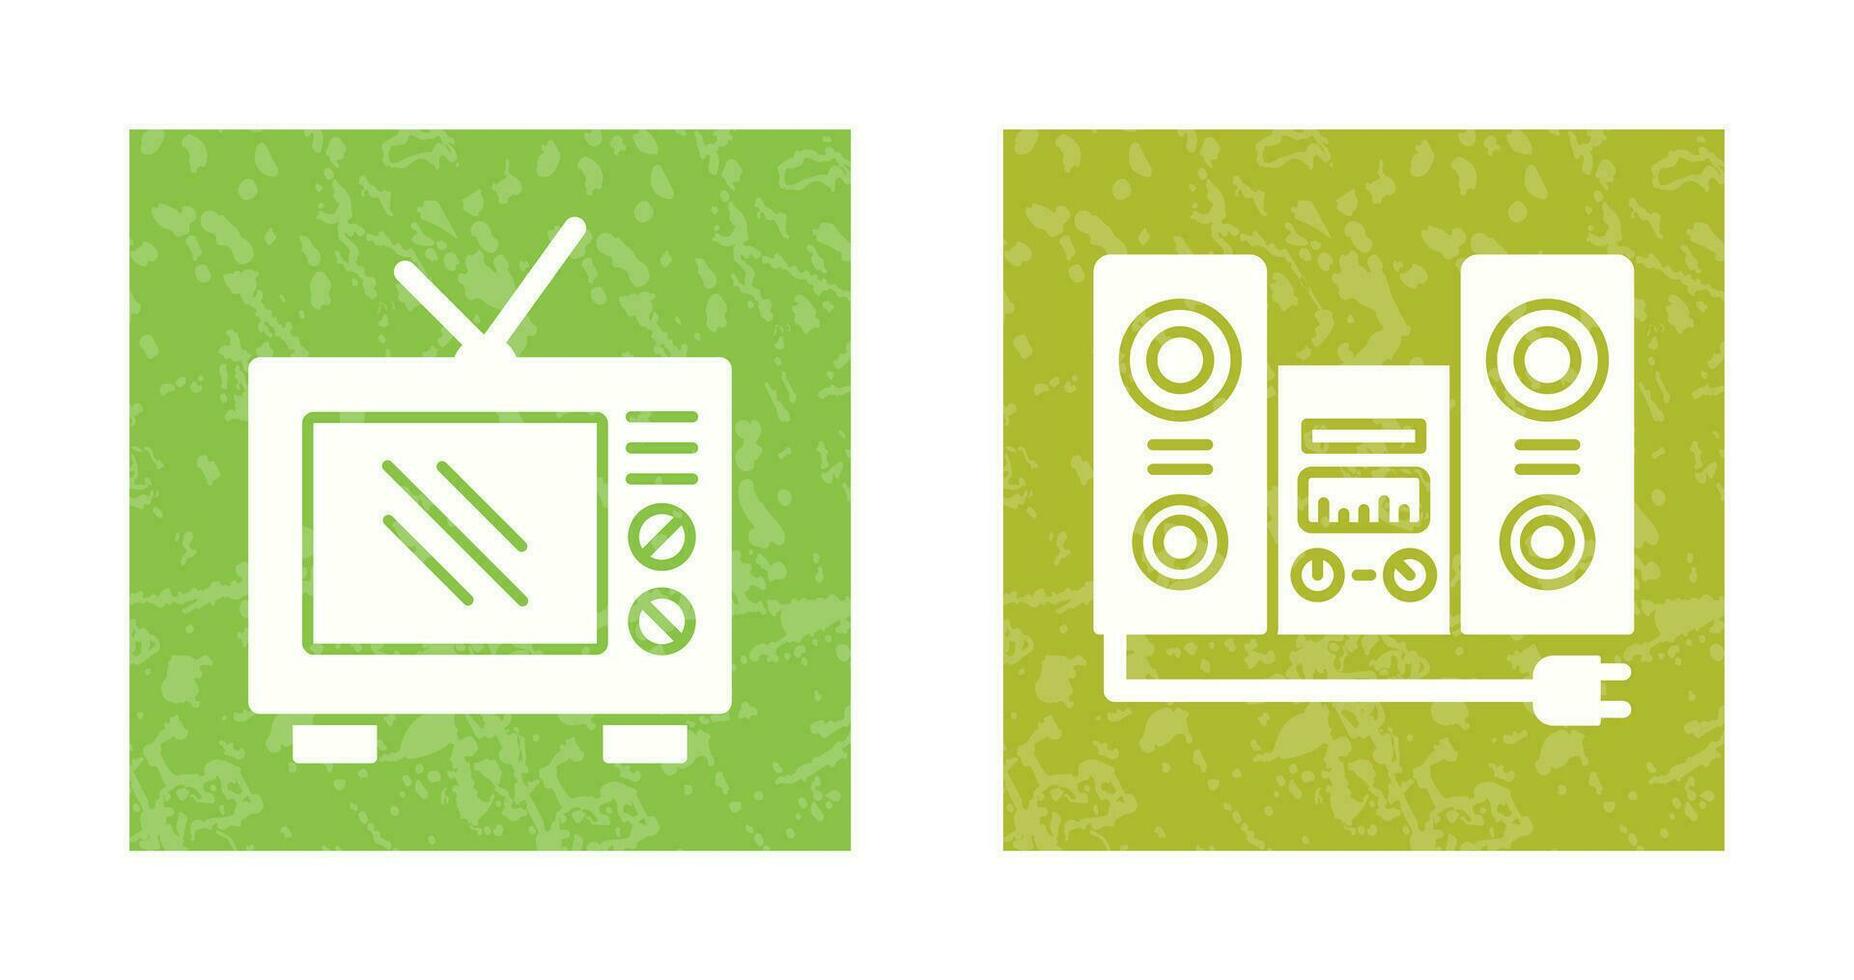 Old TV and Stereo Icon vector